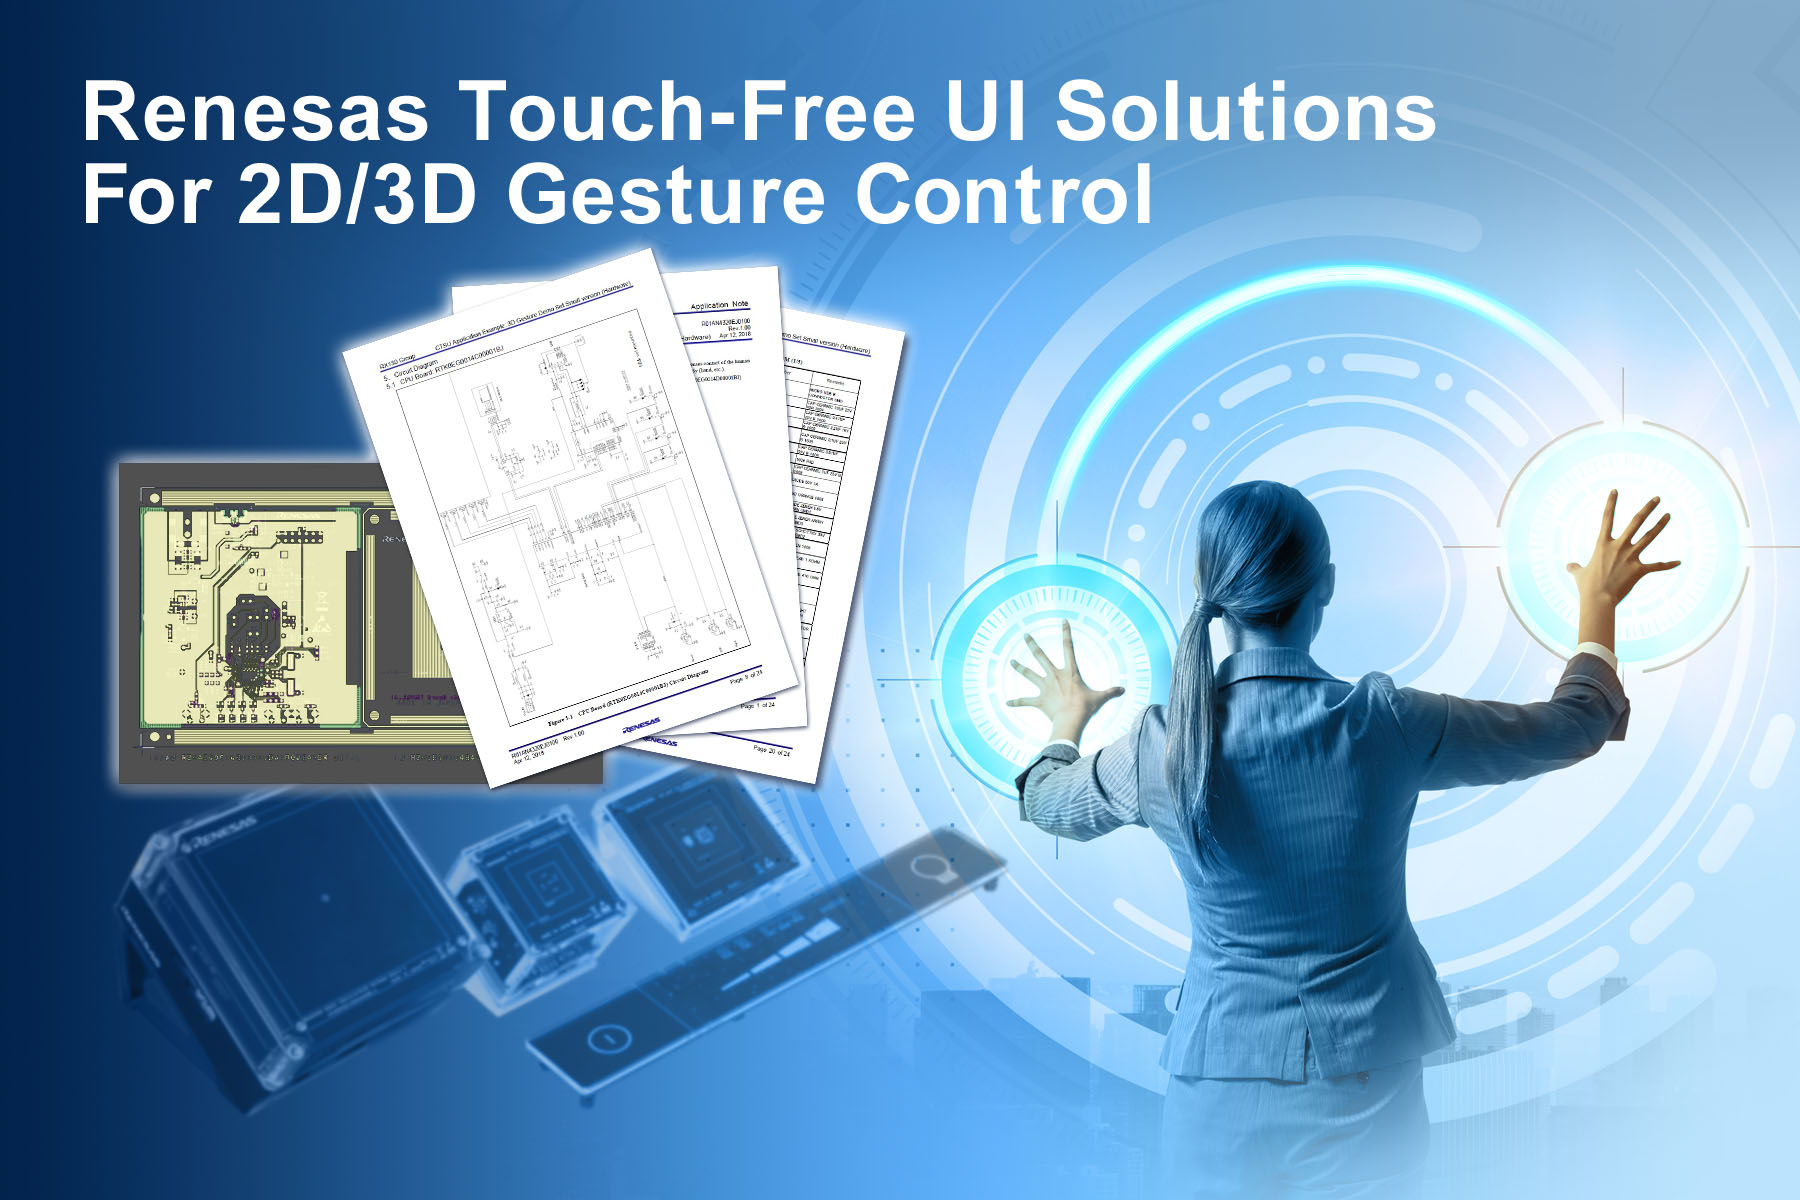 Touch-Free UI Solutions with Capacitive Microcontrollers